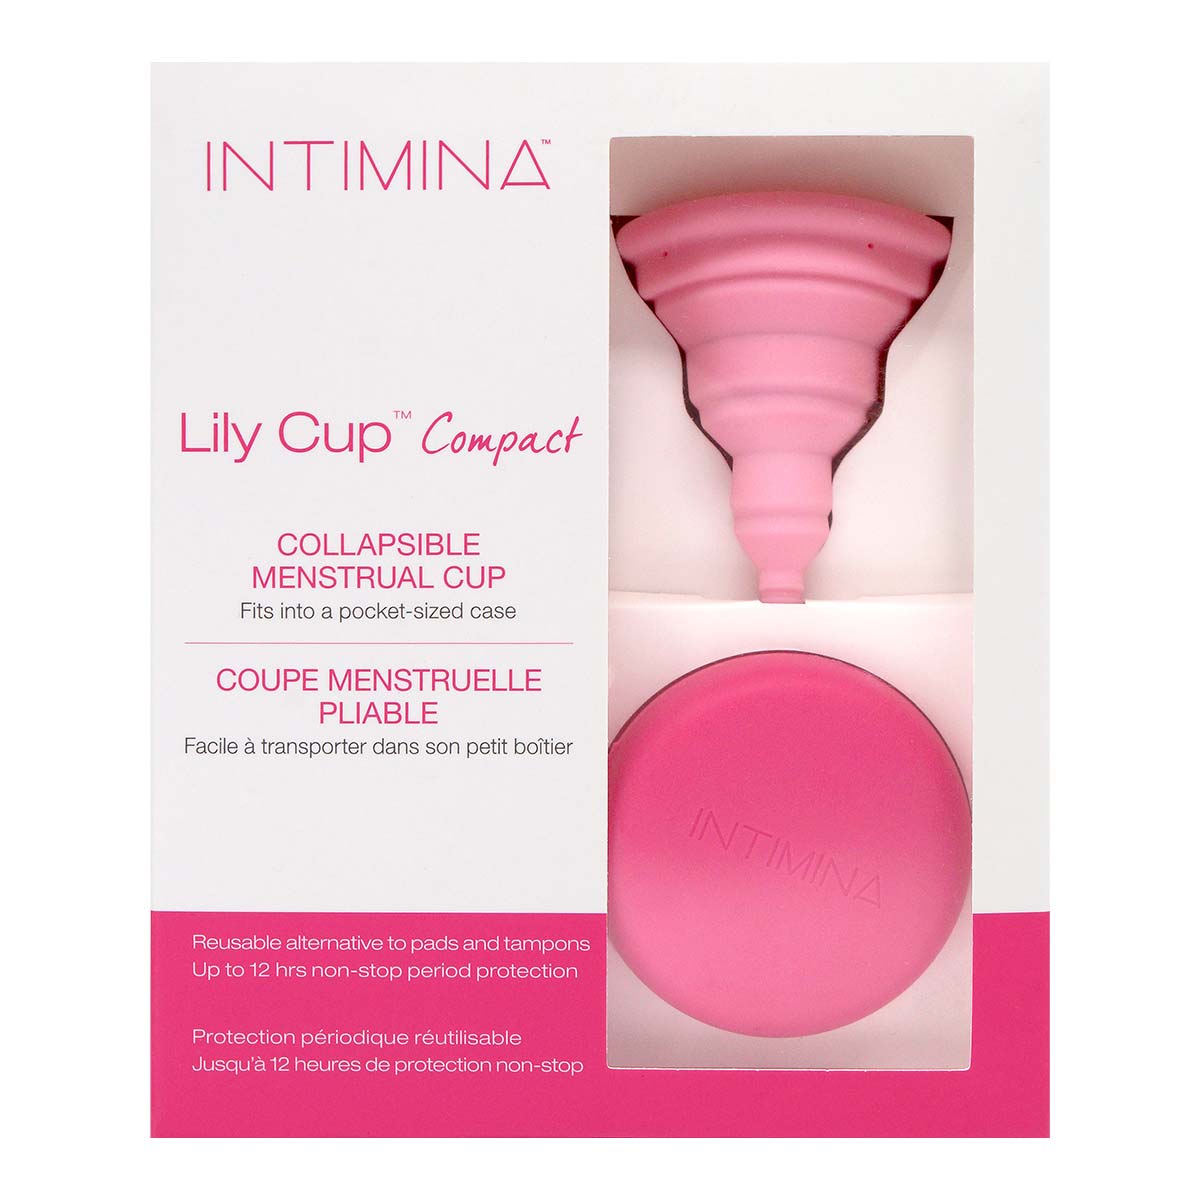 Intimina Lily Cup Compact 摺叠式月经杯 (Size A)-p_2